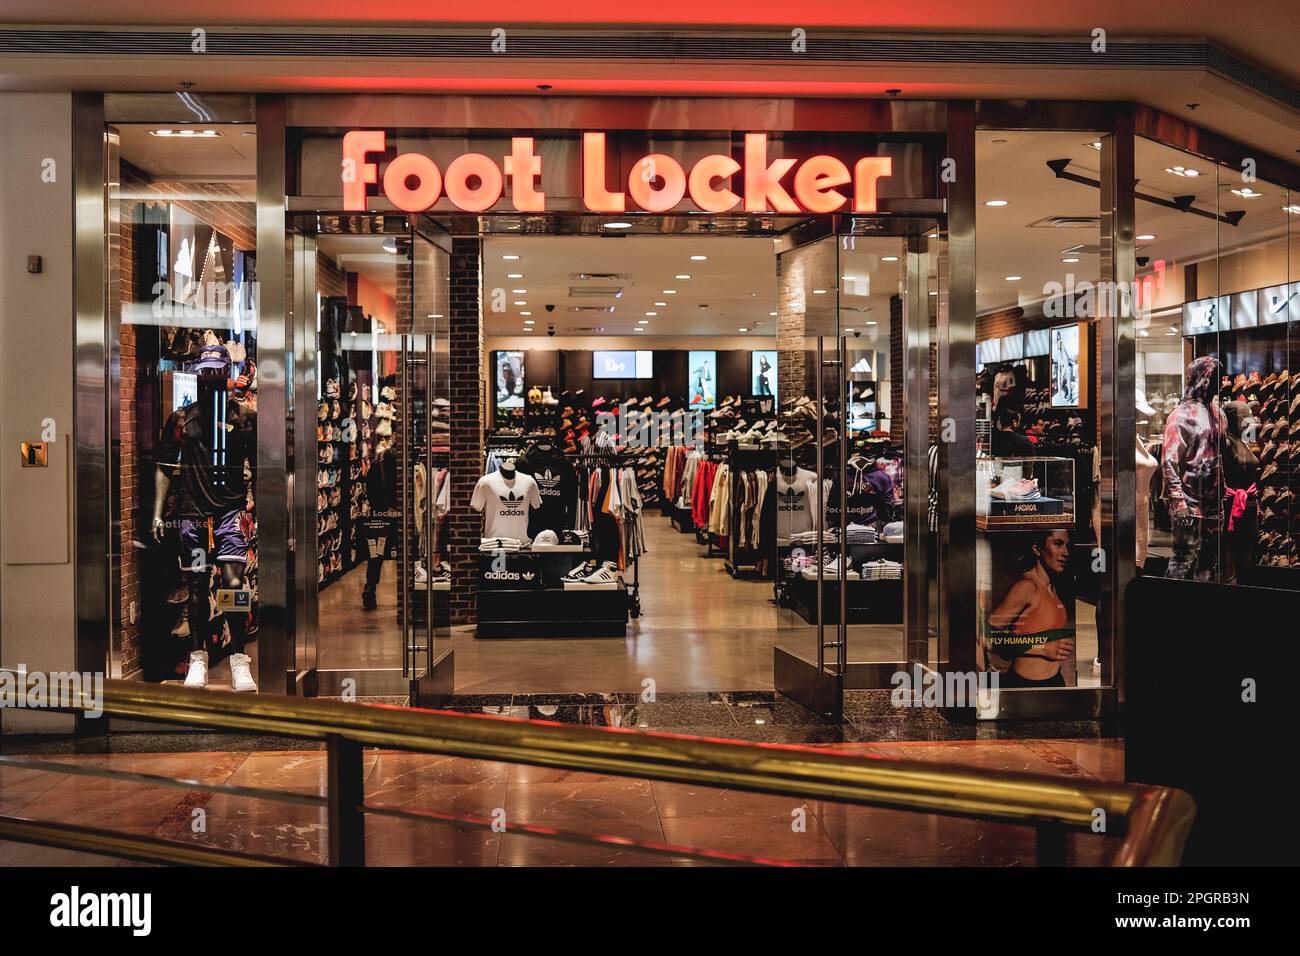 Foot Locker Opens Fourth Store in Malaysia